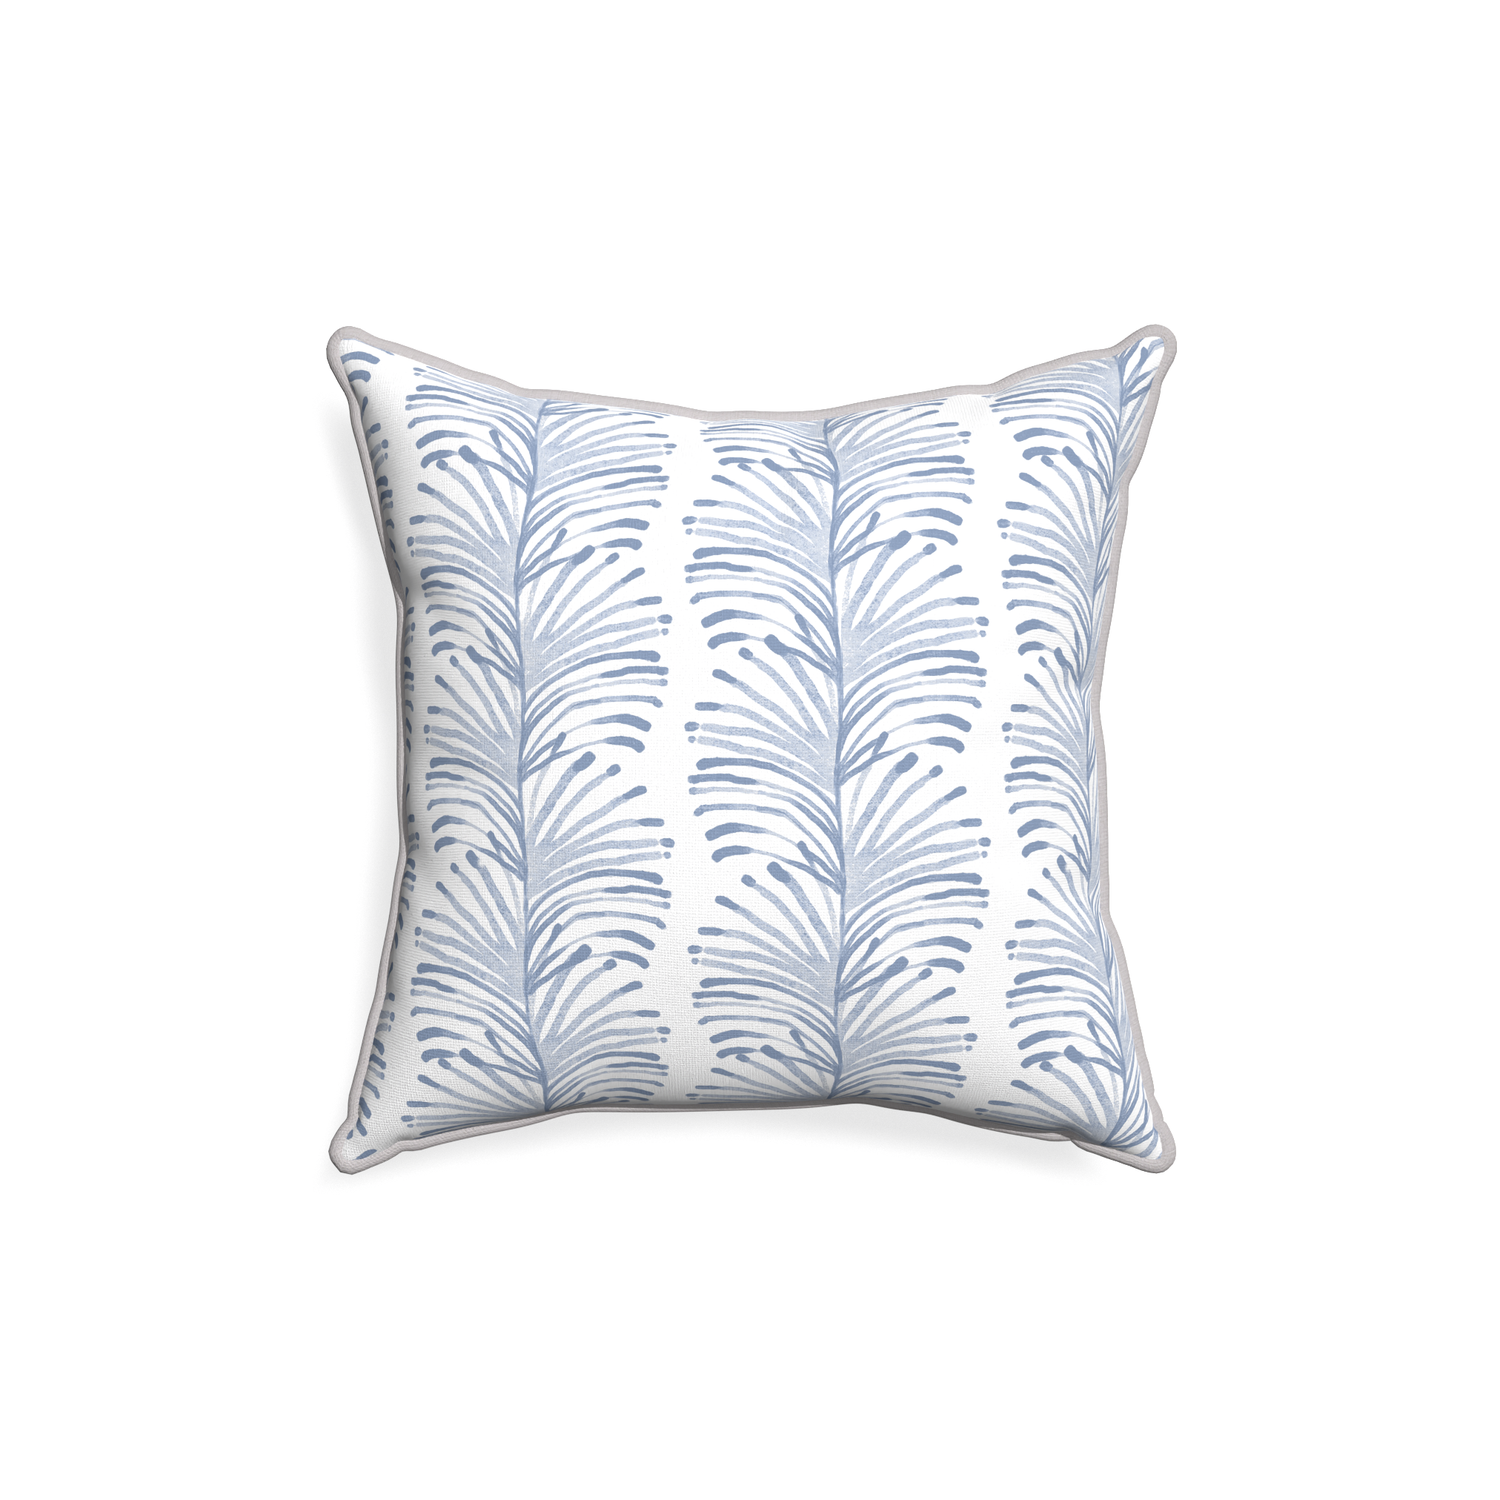 18-square emma sky custom pillow with pebble piping on white background